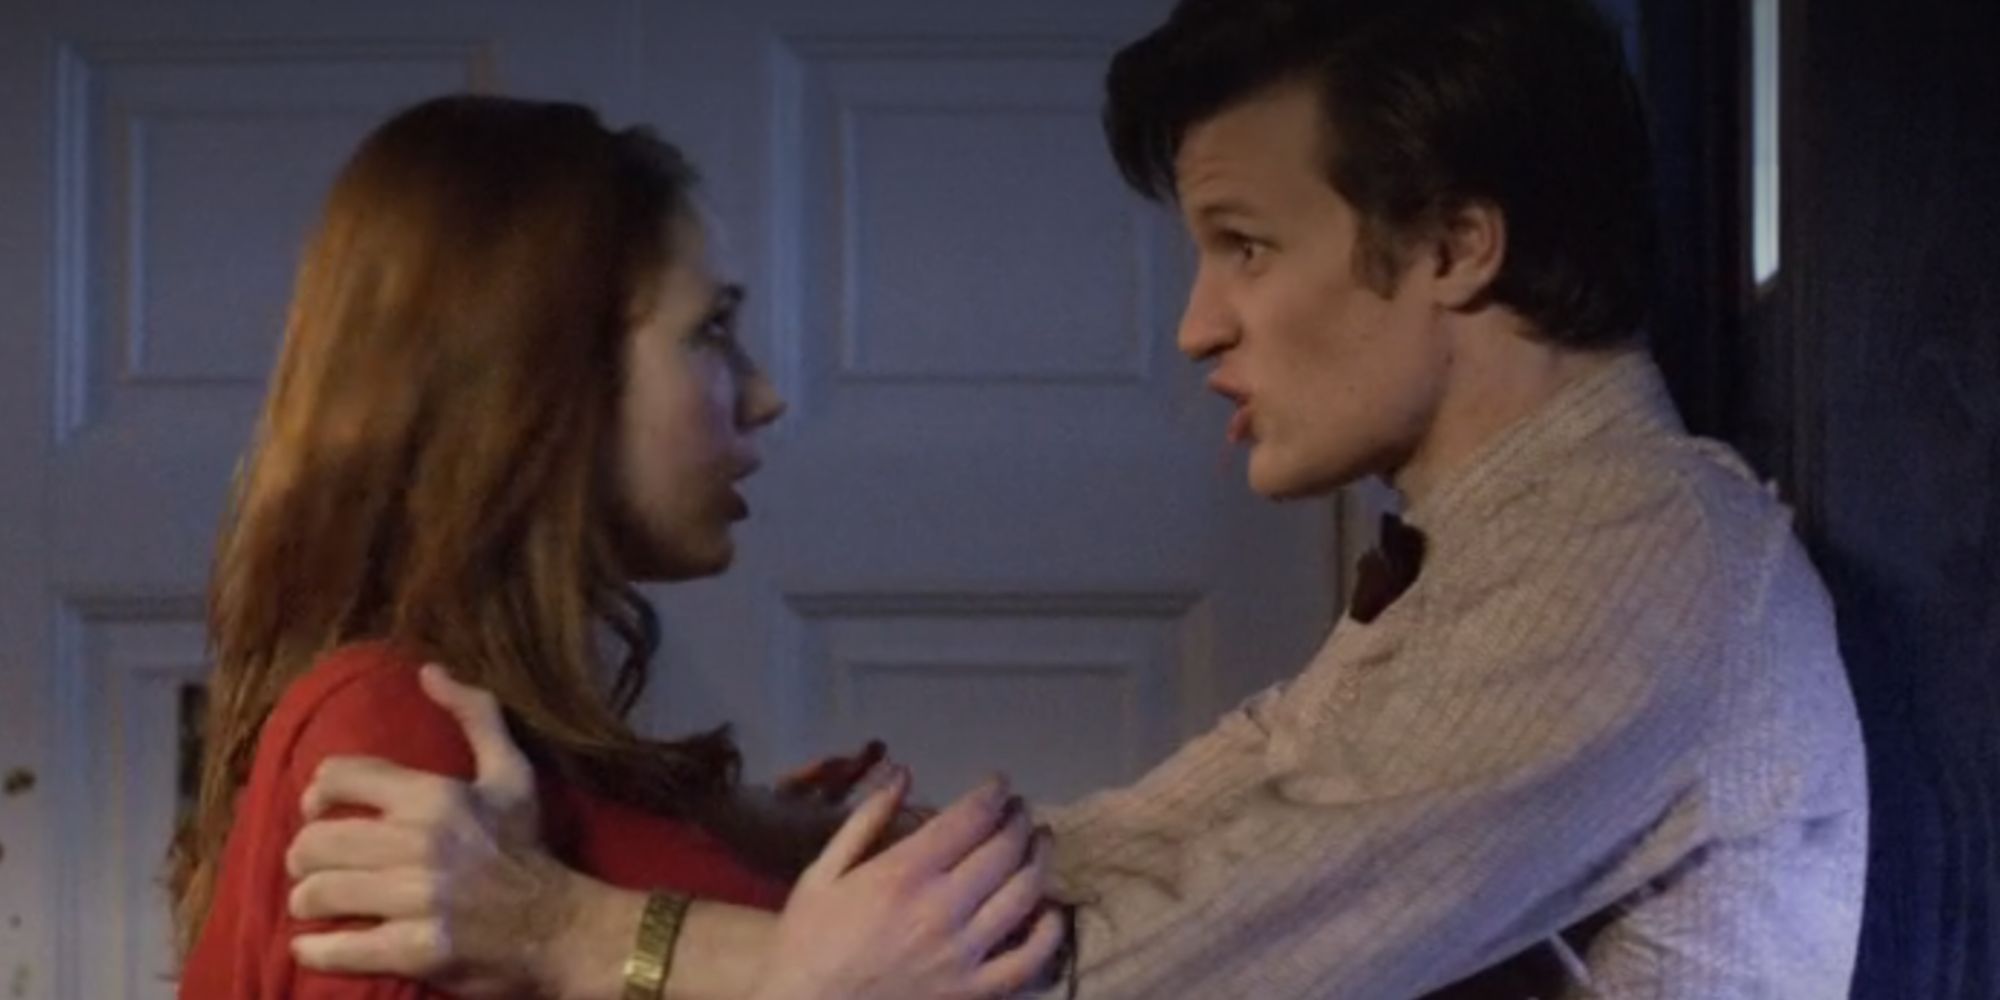 Matt Smith as the Eleventh Doctor in Doctor Who holding Karen Gillan's Amy Pond at arm's length